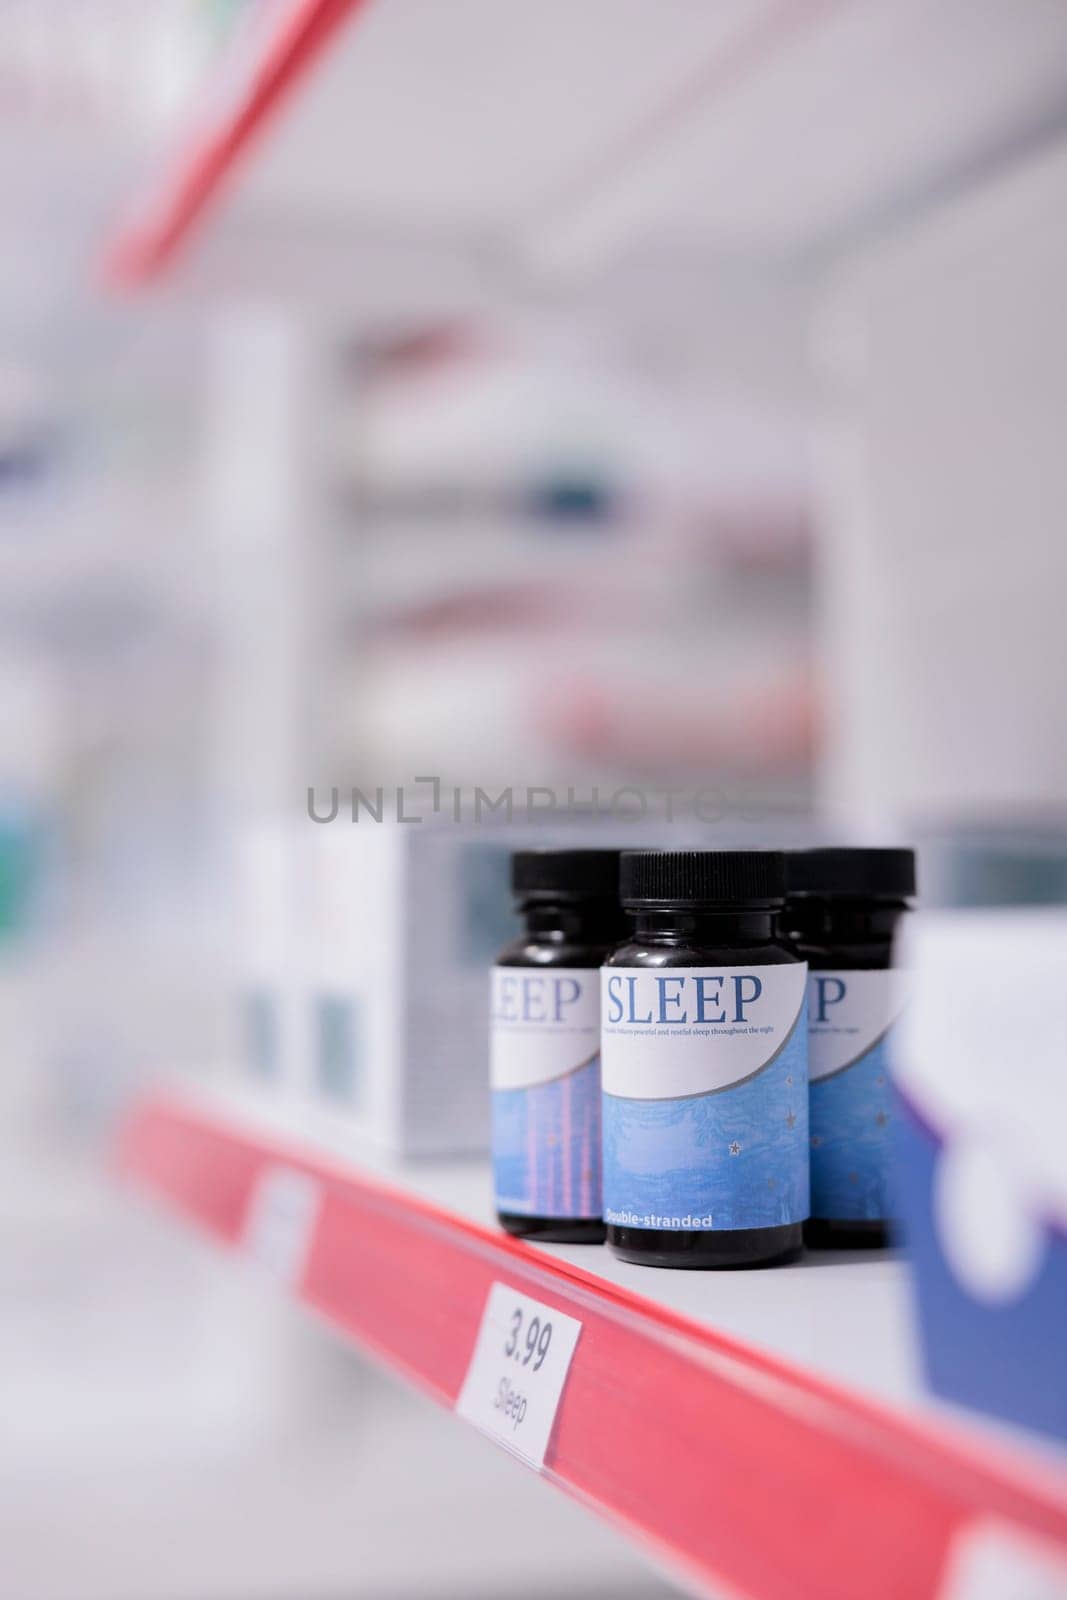 Health care store shelves filled with medicaments and pharmaceutical products by DCStudio